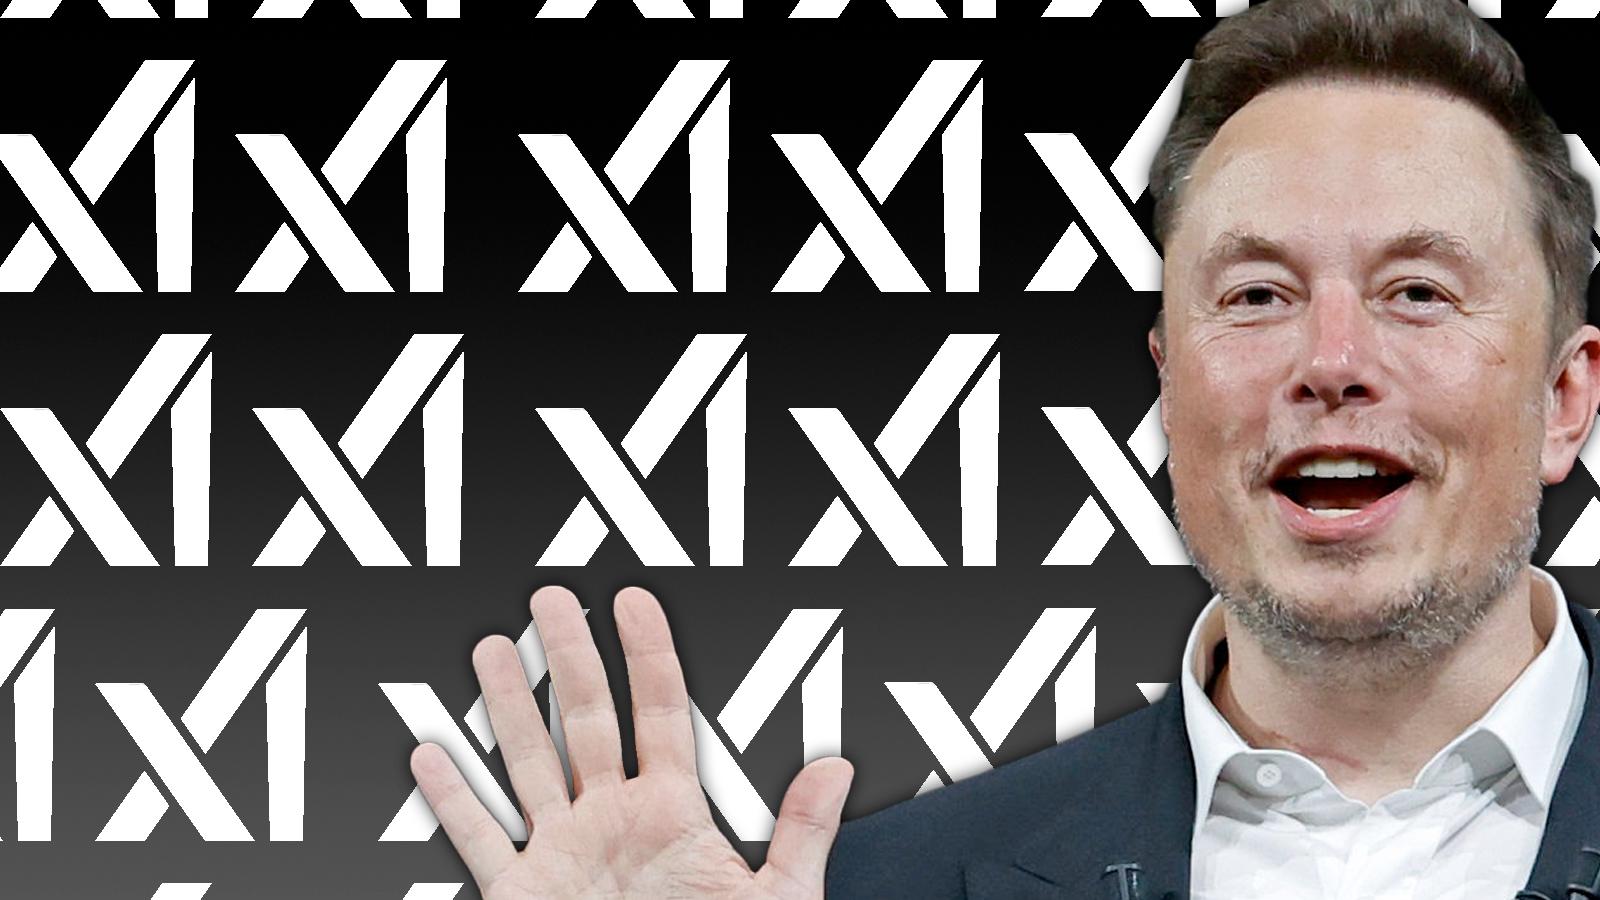 Elon Musk in front of the xAI logo